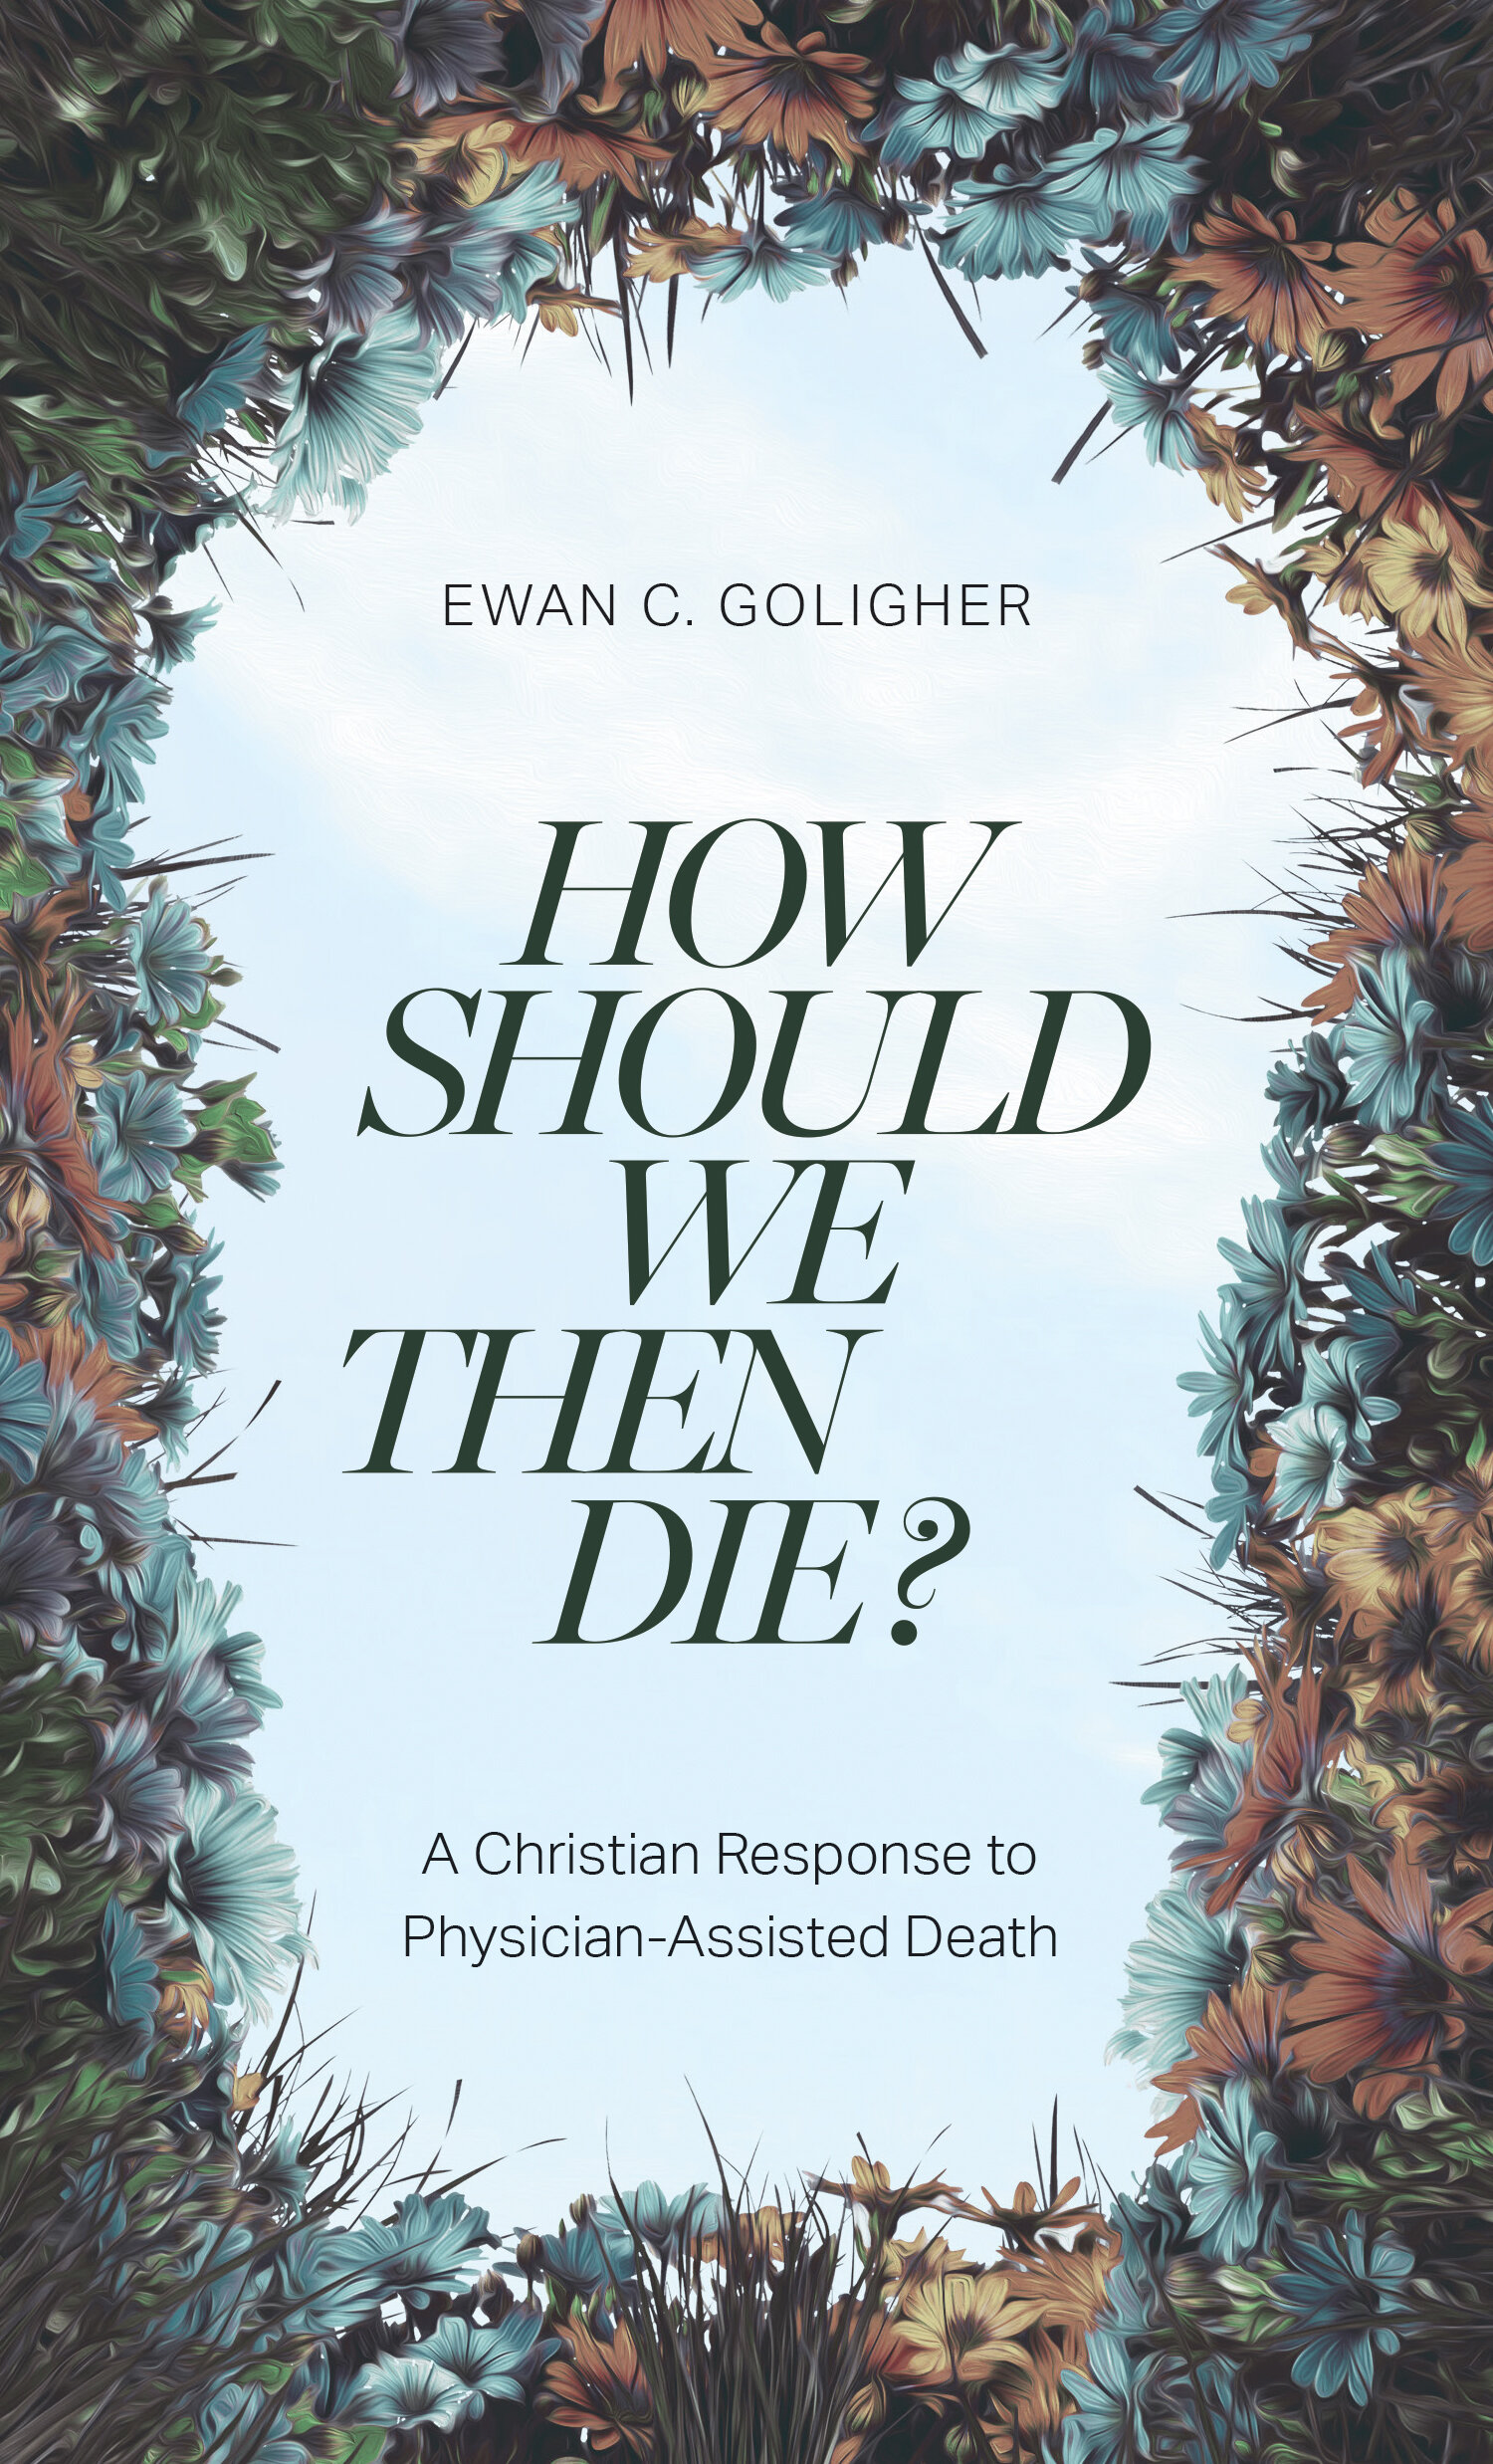 How Should We then Die? A Christian Response to Physician-Assisted Death